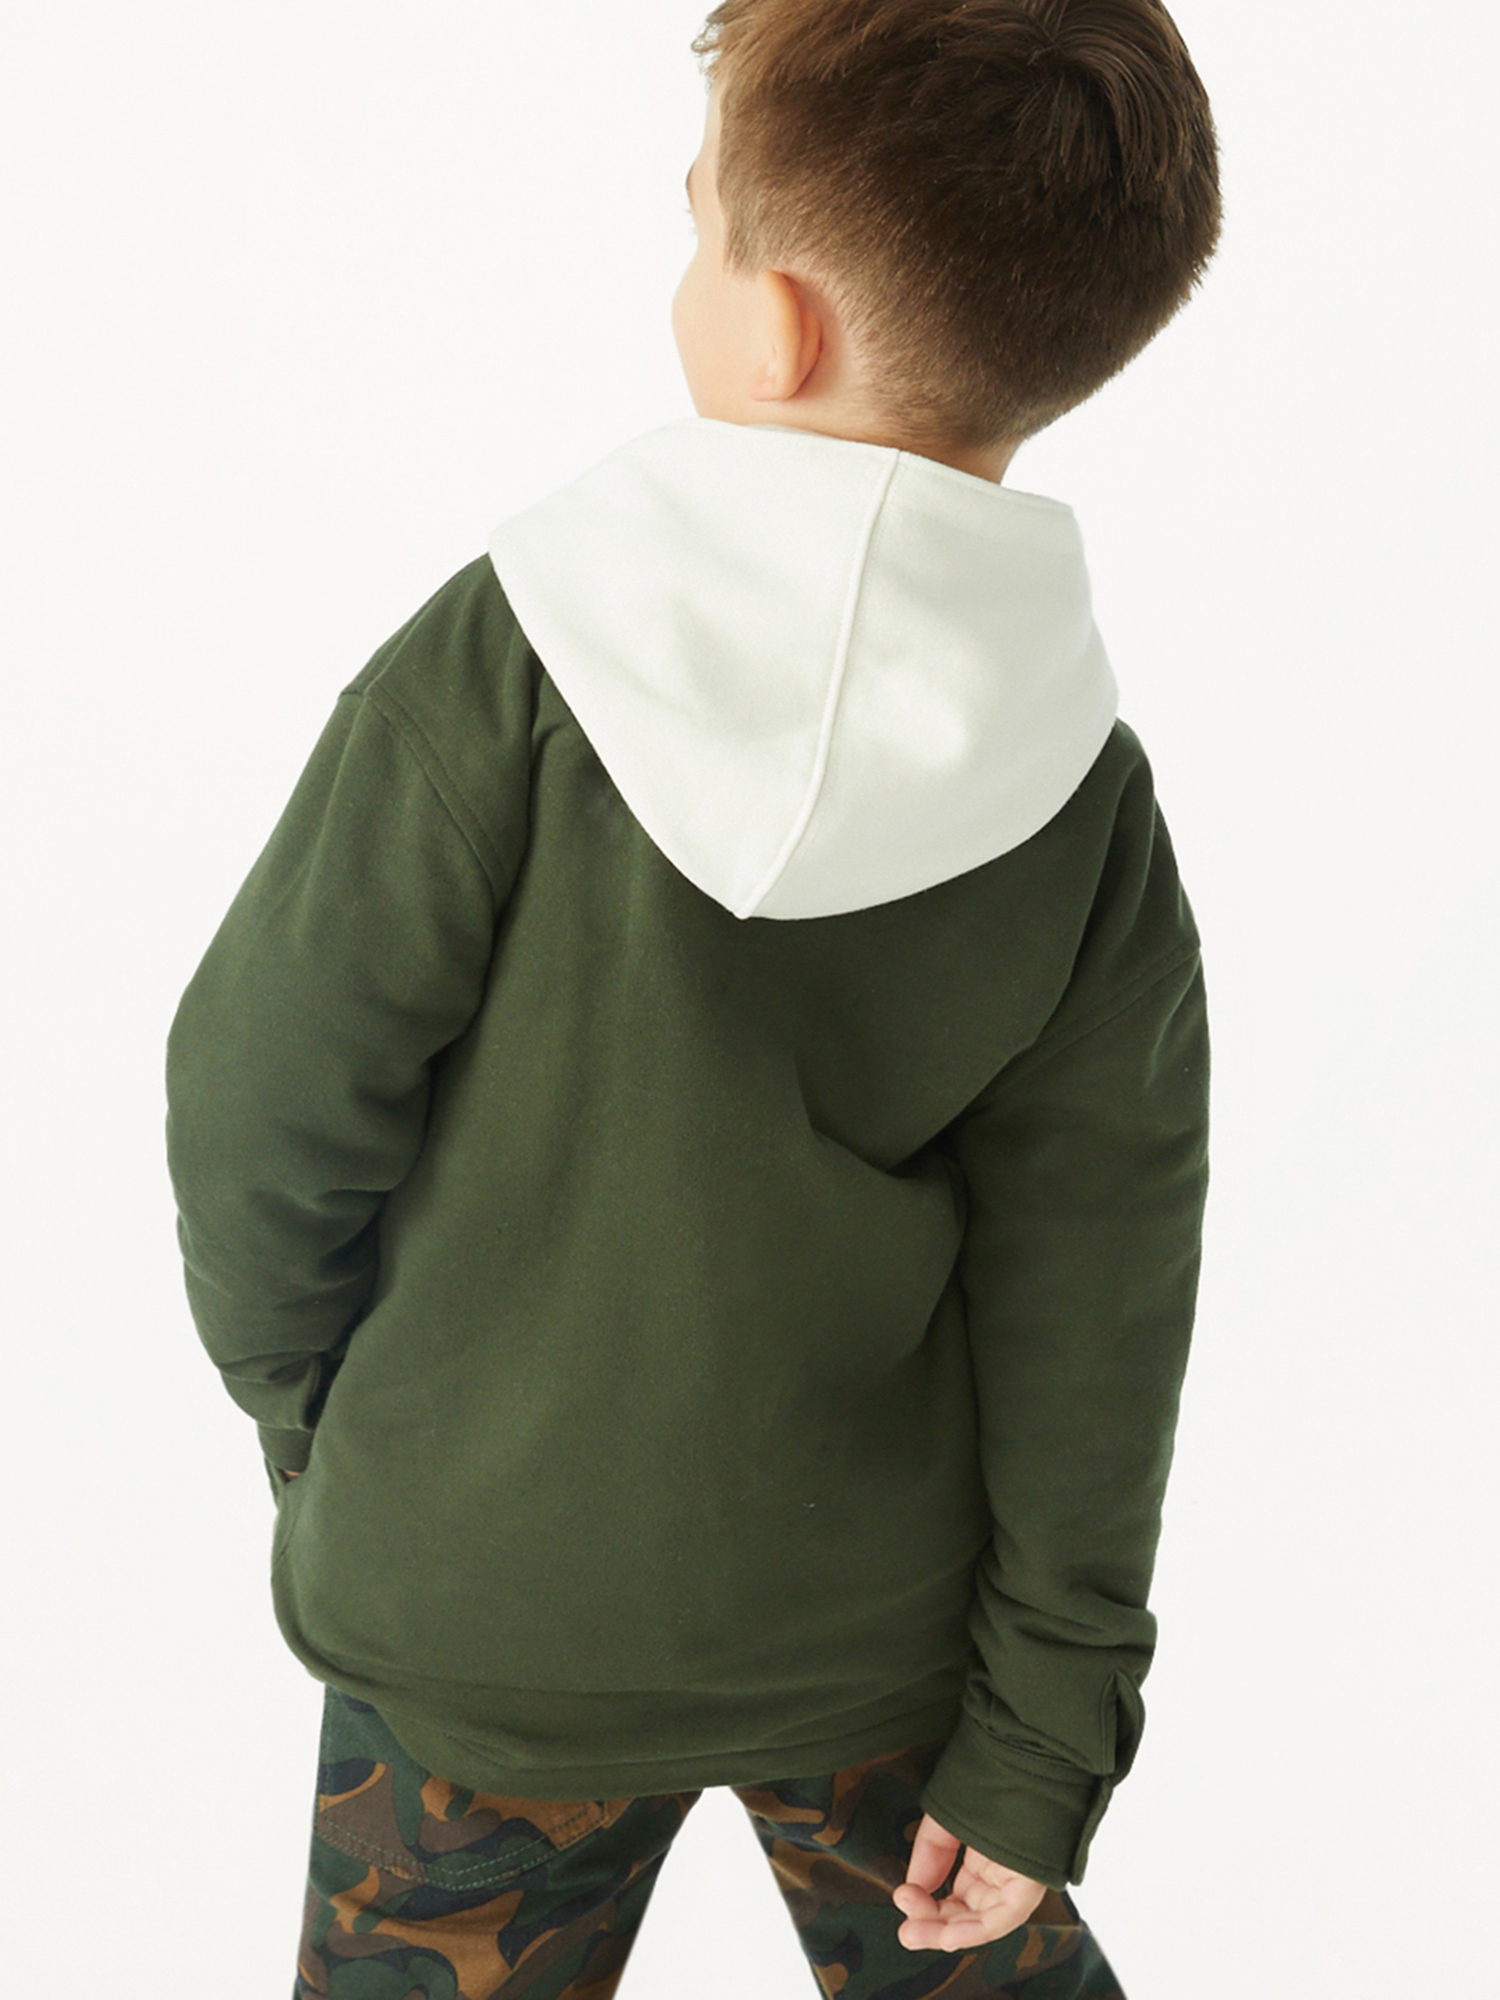 Free Assembly Boys French Terry Shacket, Sizes 4-18 - image 3 of 5